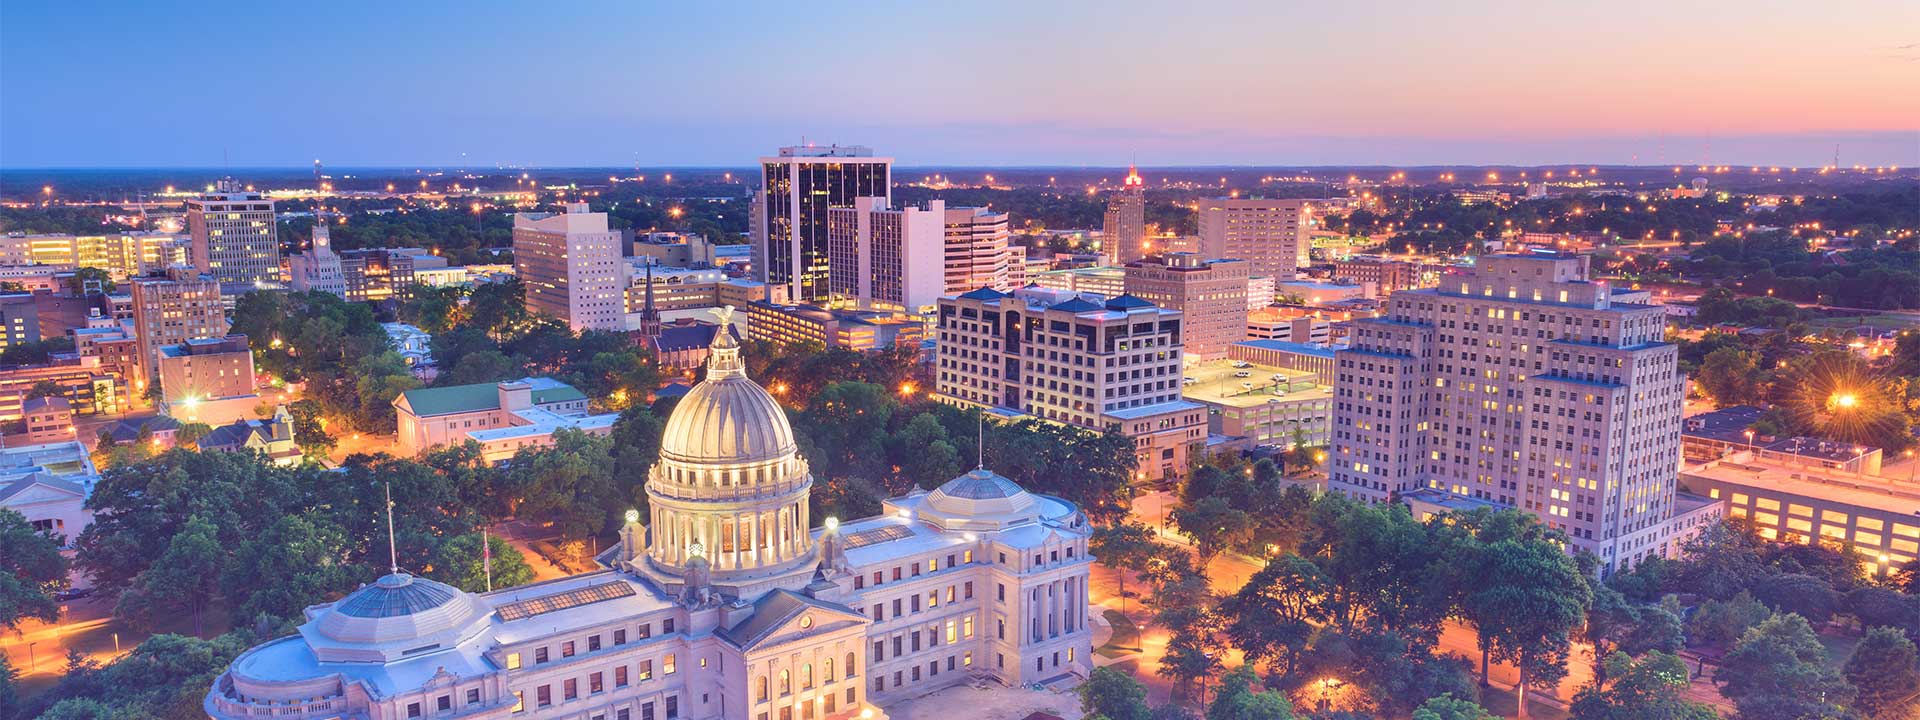 Jackson, Mississippi capitol and city photographed from above